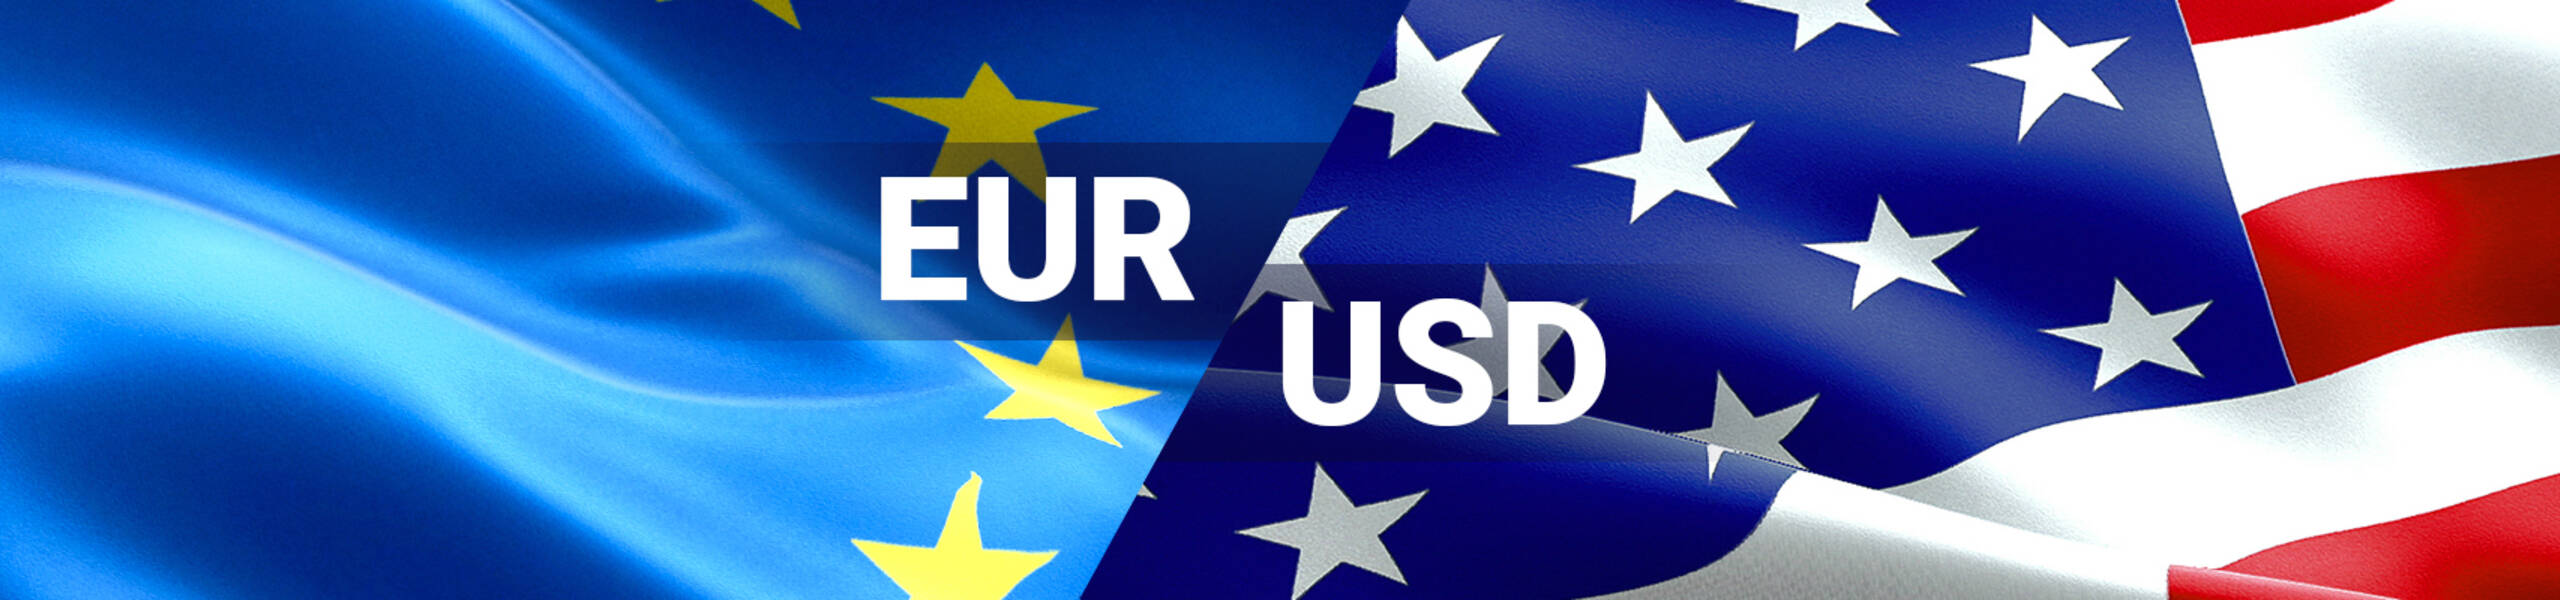 EUR/USD: euro testing SSB’s support